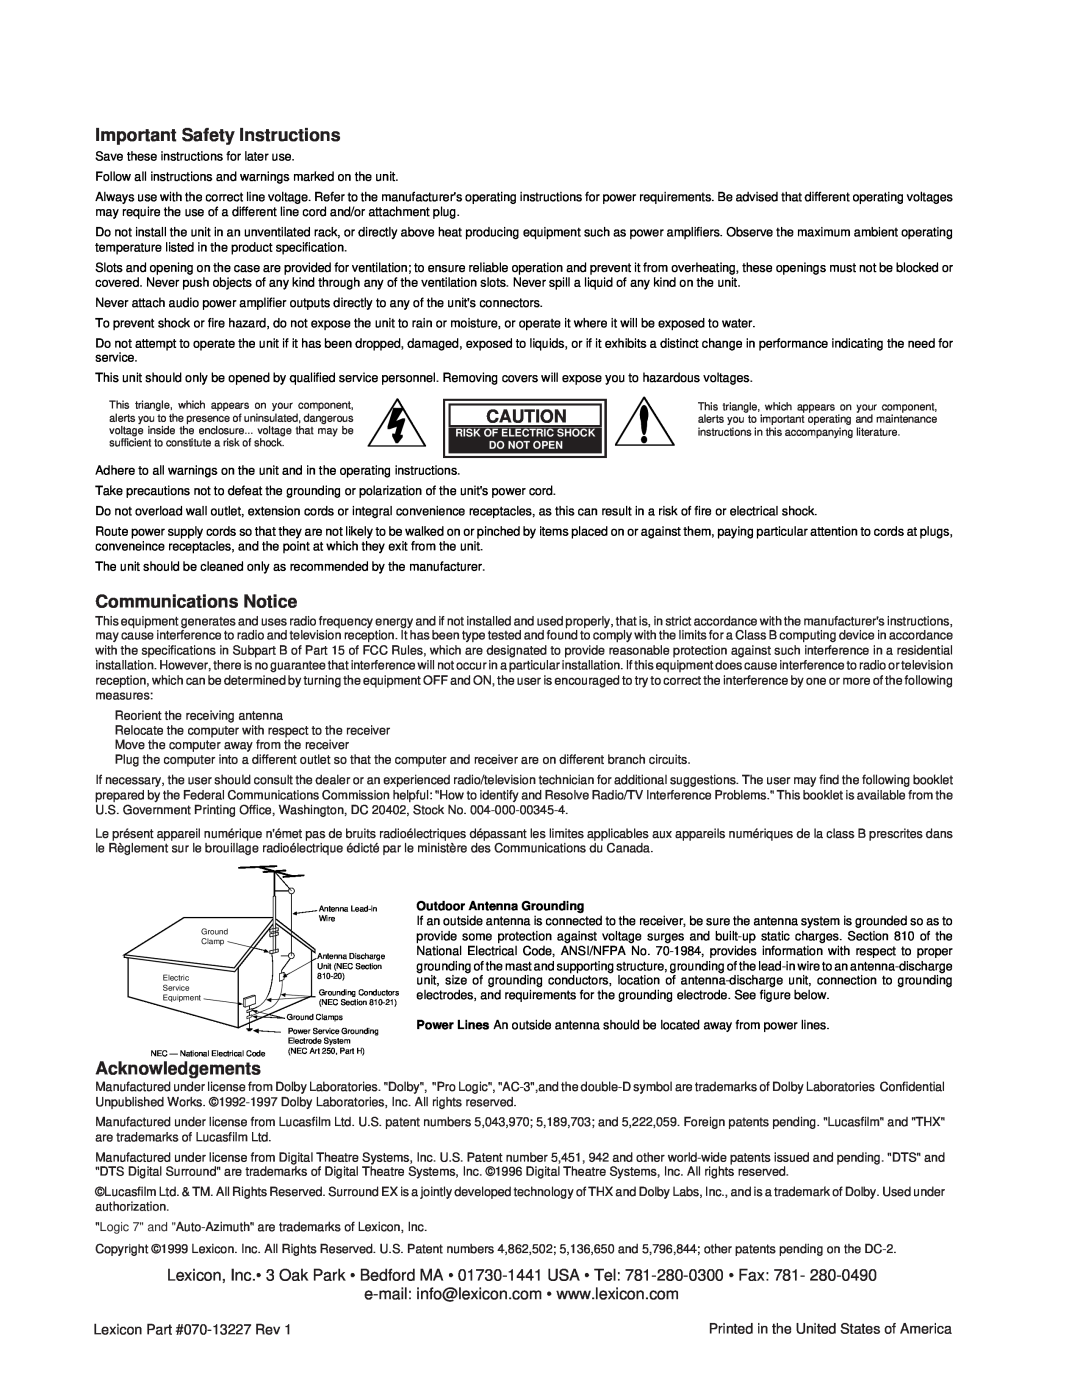 Lexicon DC-2 owner manual Important Safety Instructions, Communications Notice, Acknowledgements, Outdoor Antenna Grounding 